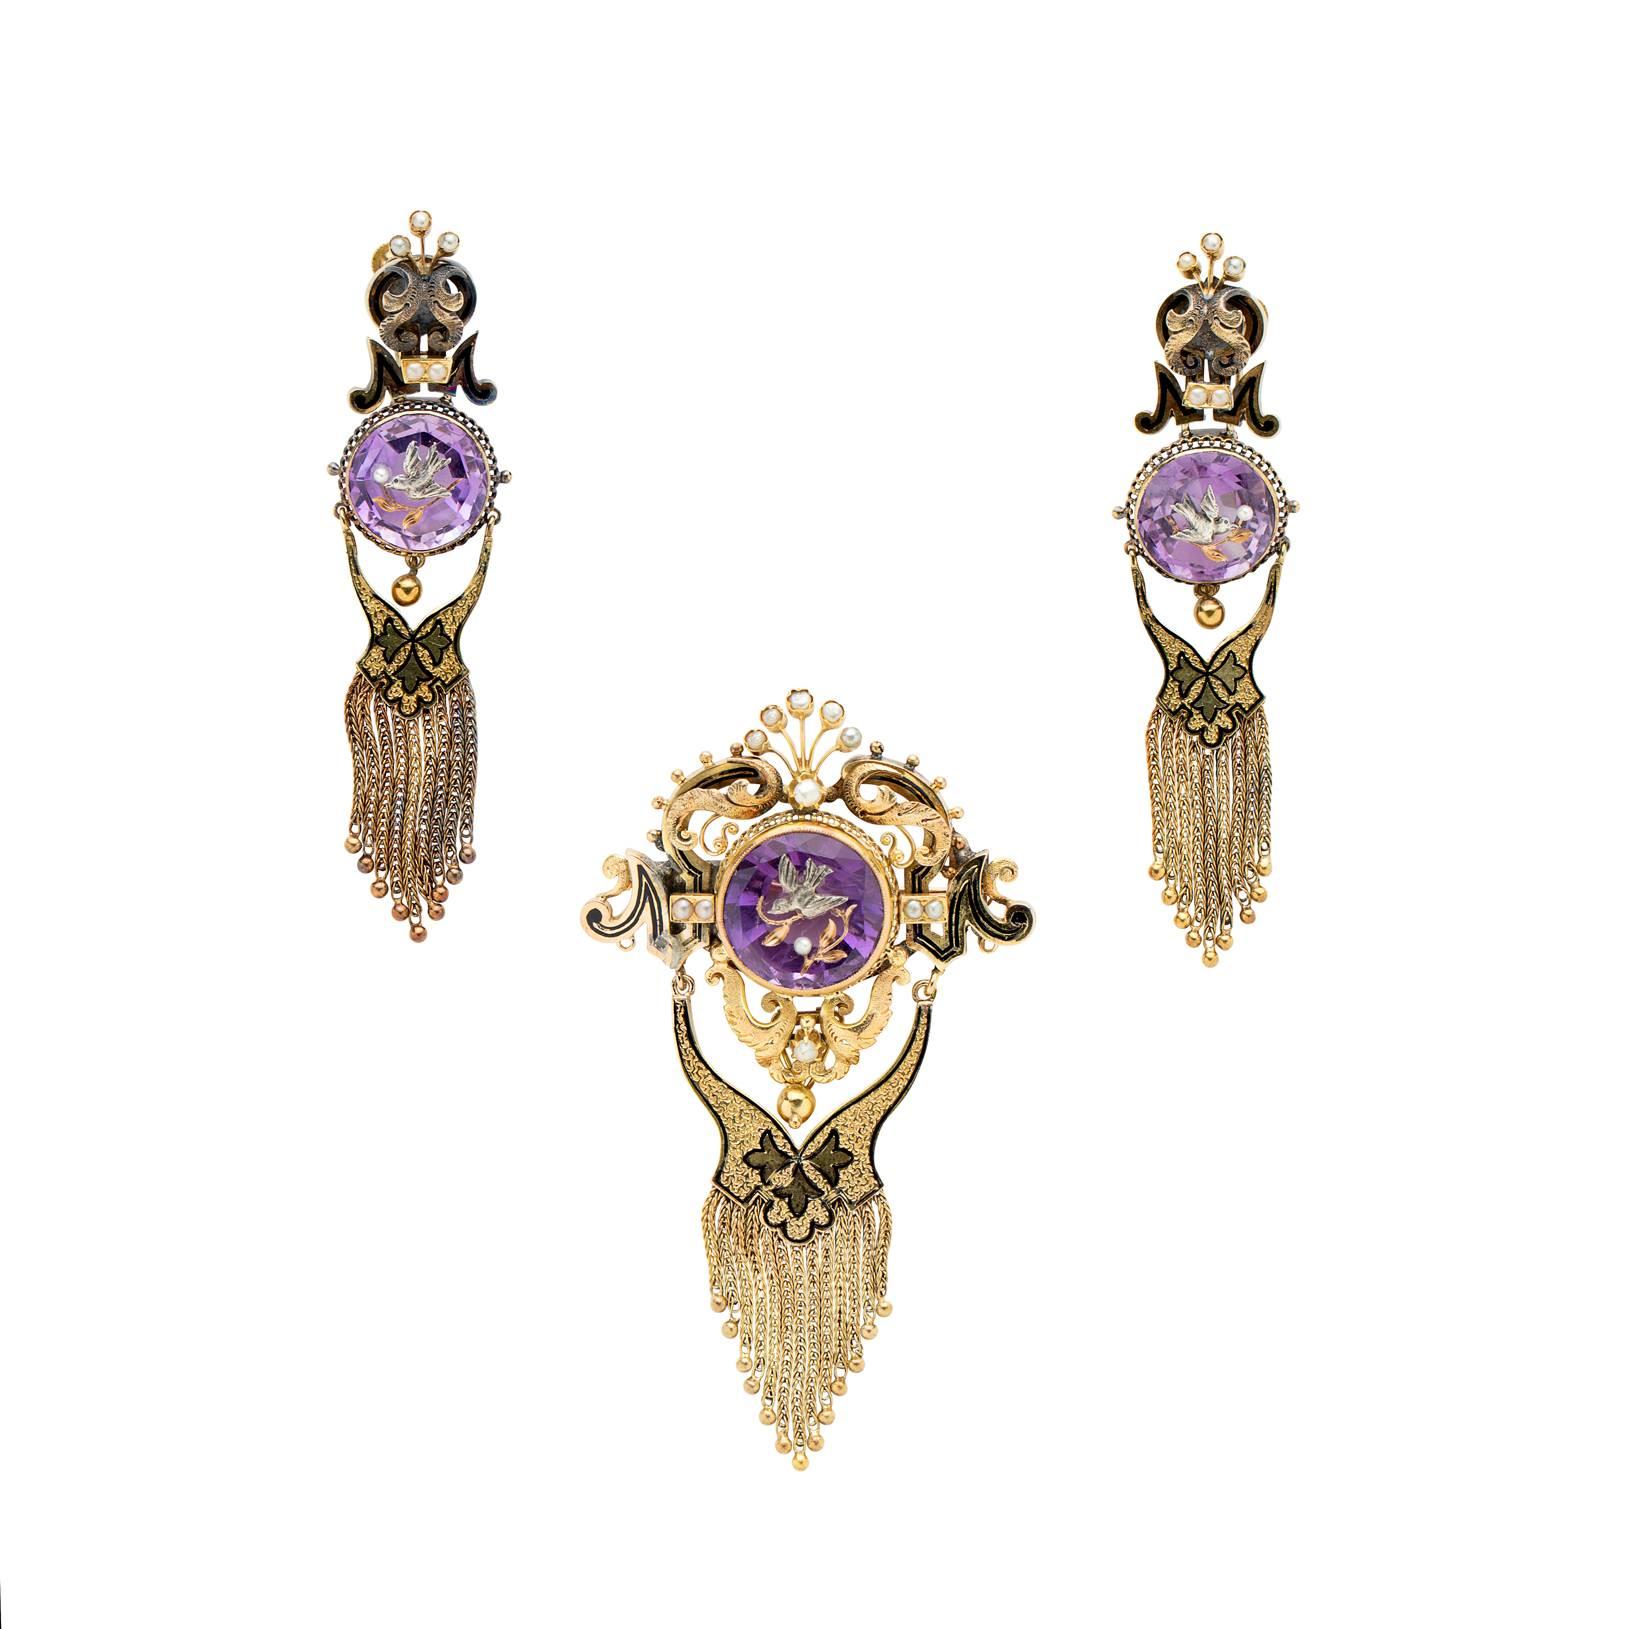 Victorian 1870s Amethyst Intaglio Brooch and Earring Set